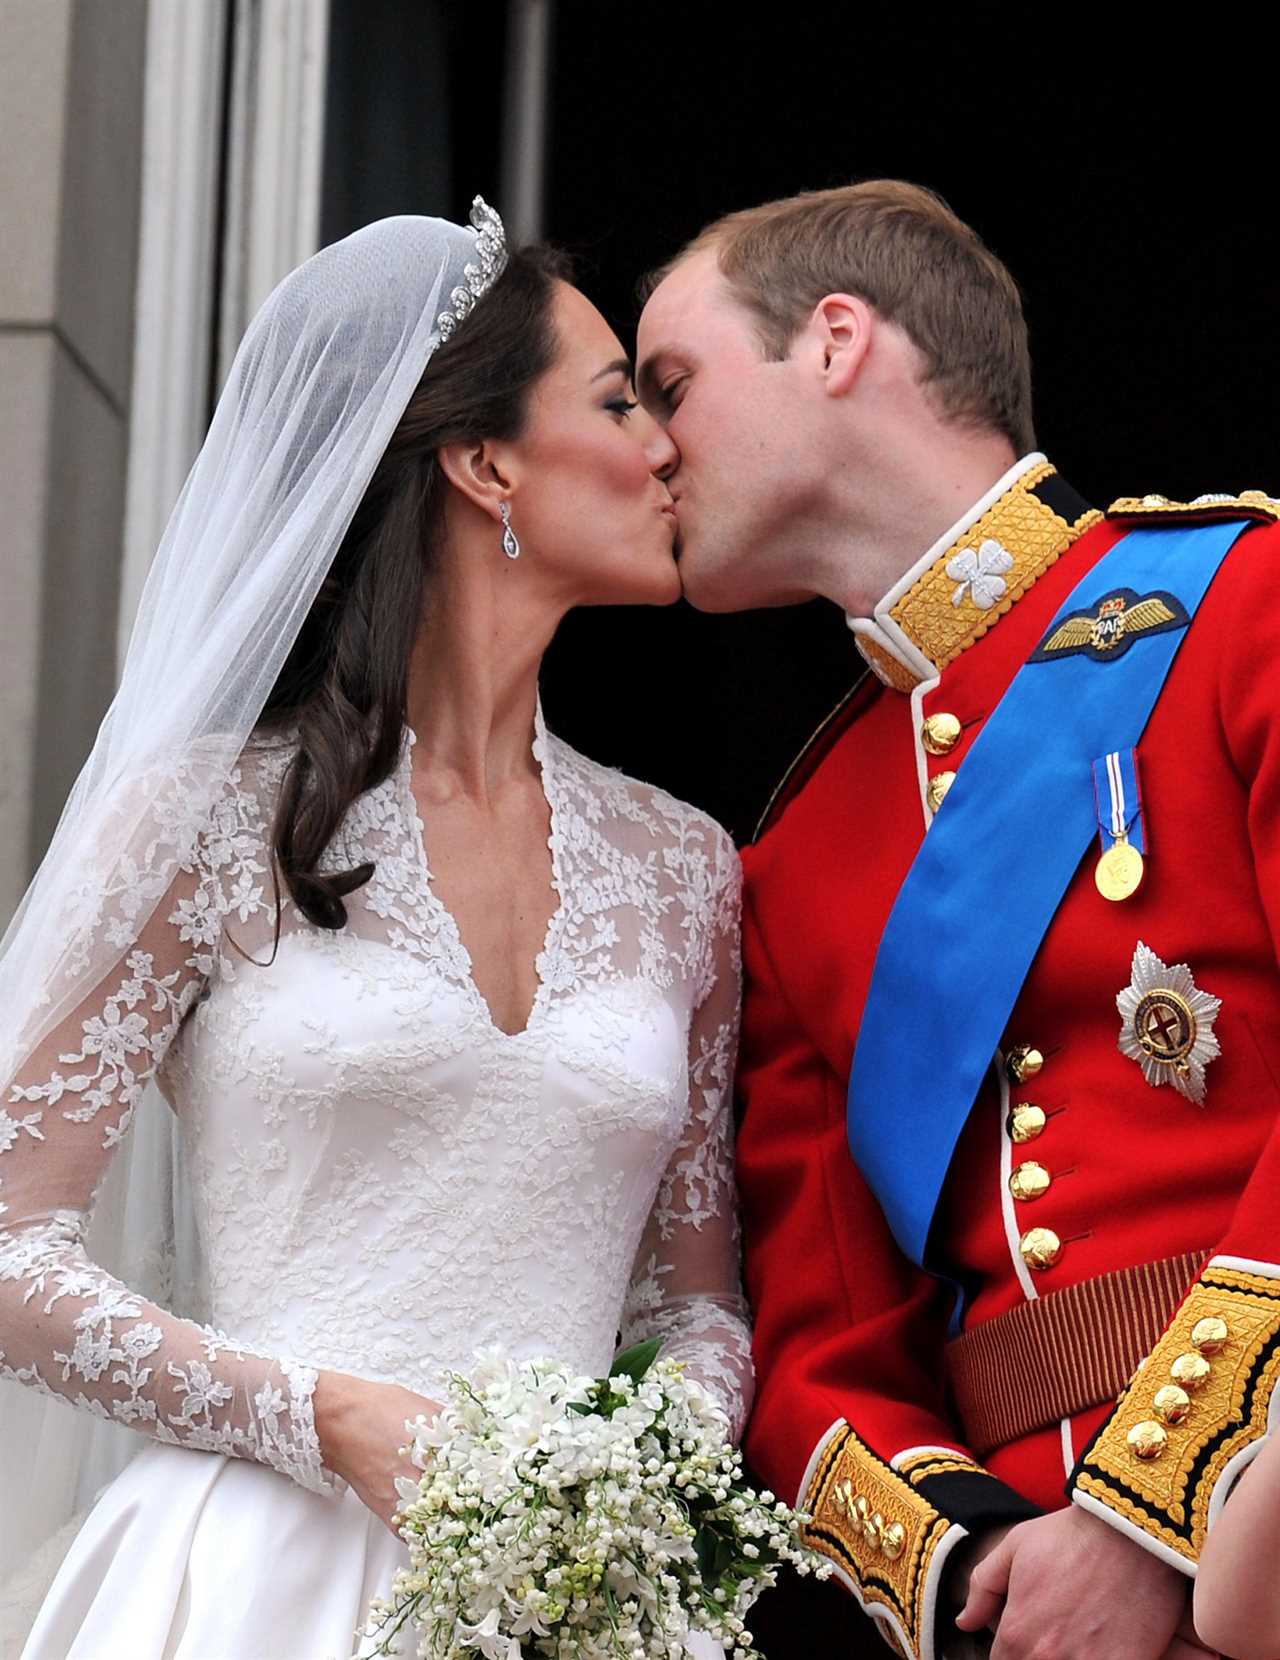 Kate Middleton married Prince William in 2011, but it could have been a very different story